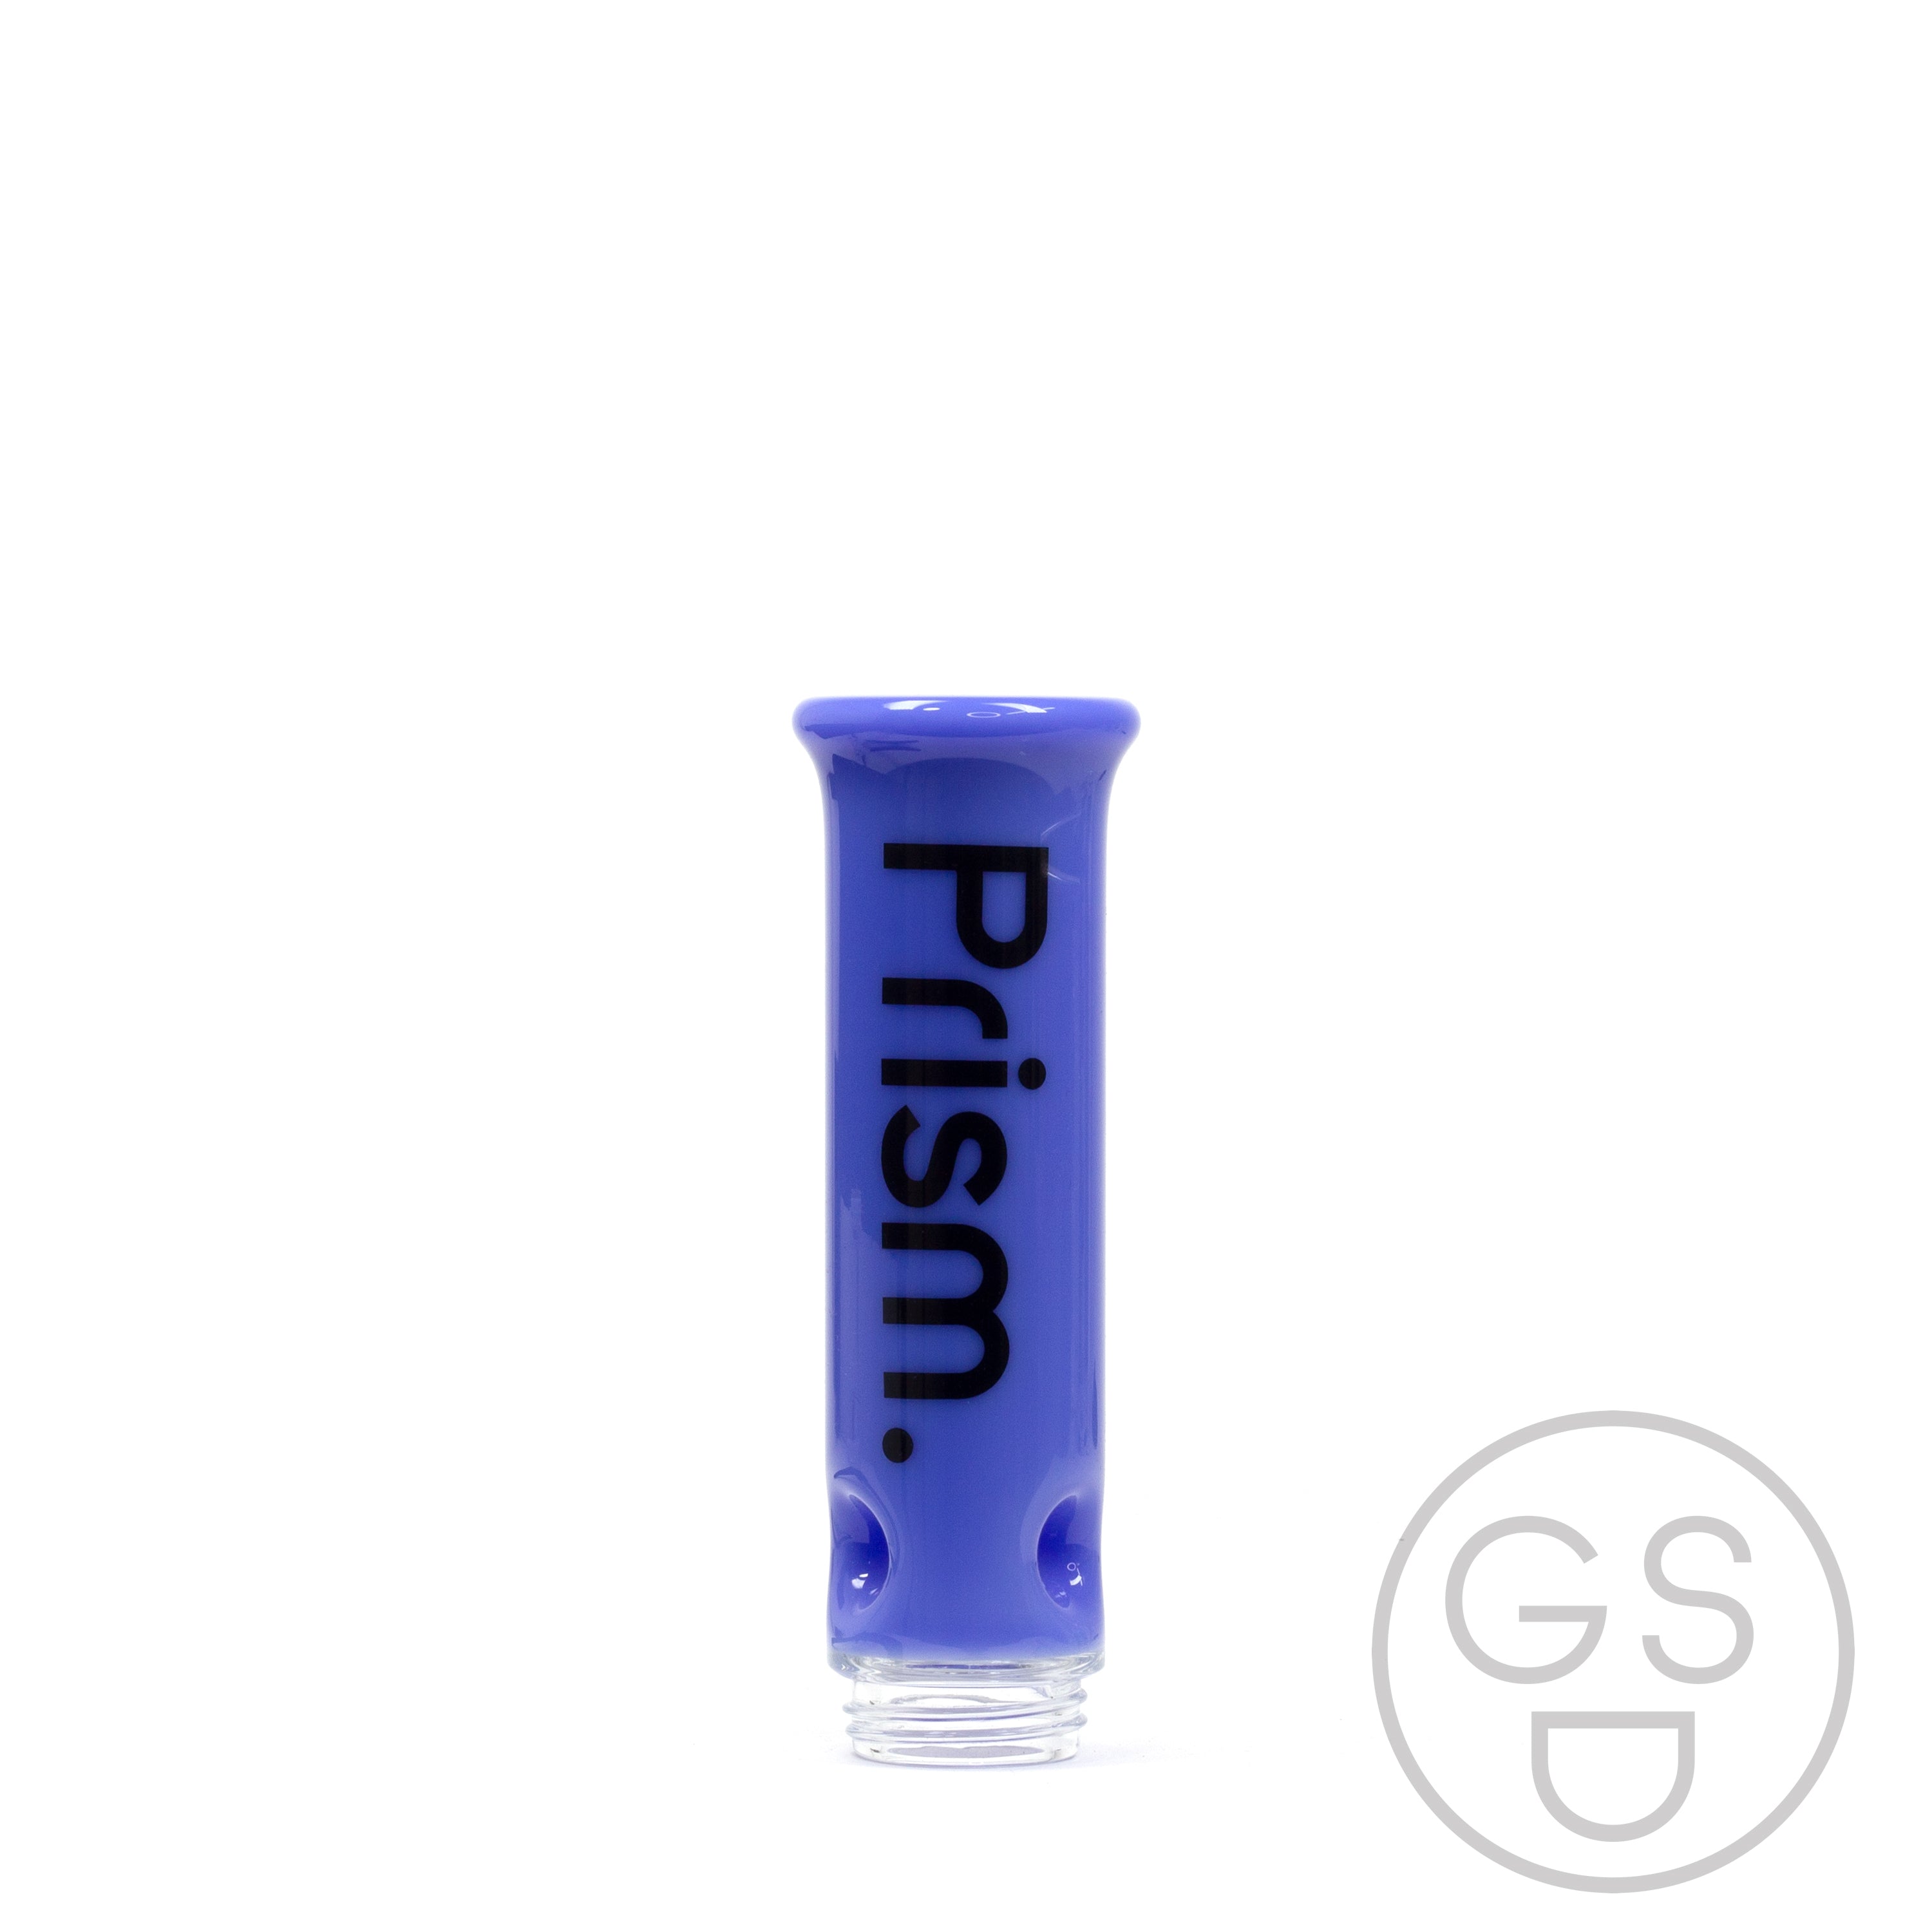 Prism Modular Waterpipe Standard Mouthpiece - Prism / Blueberry